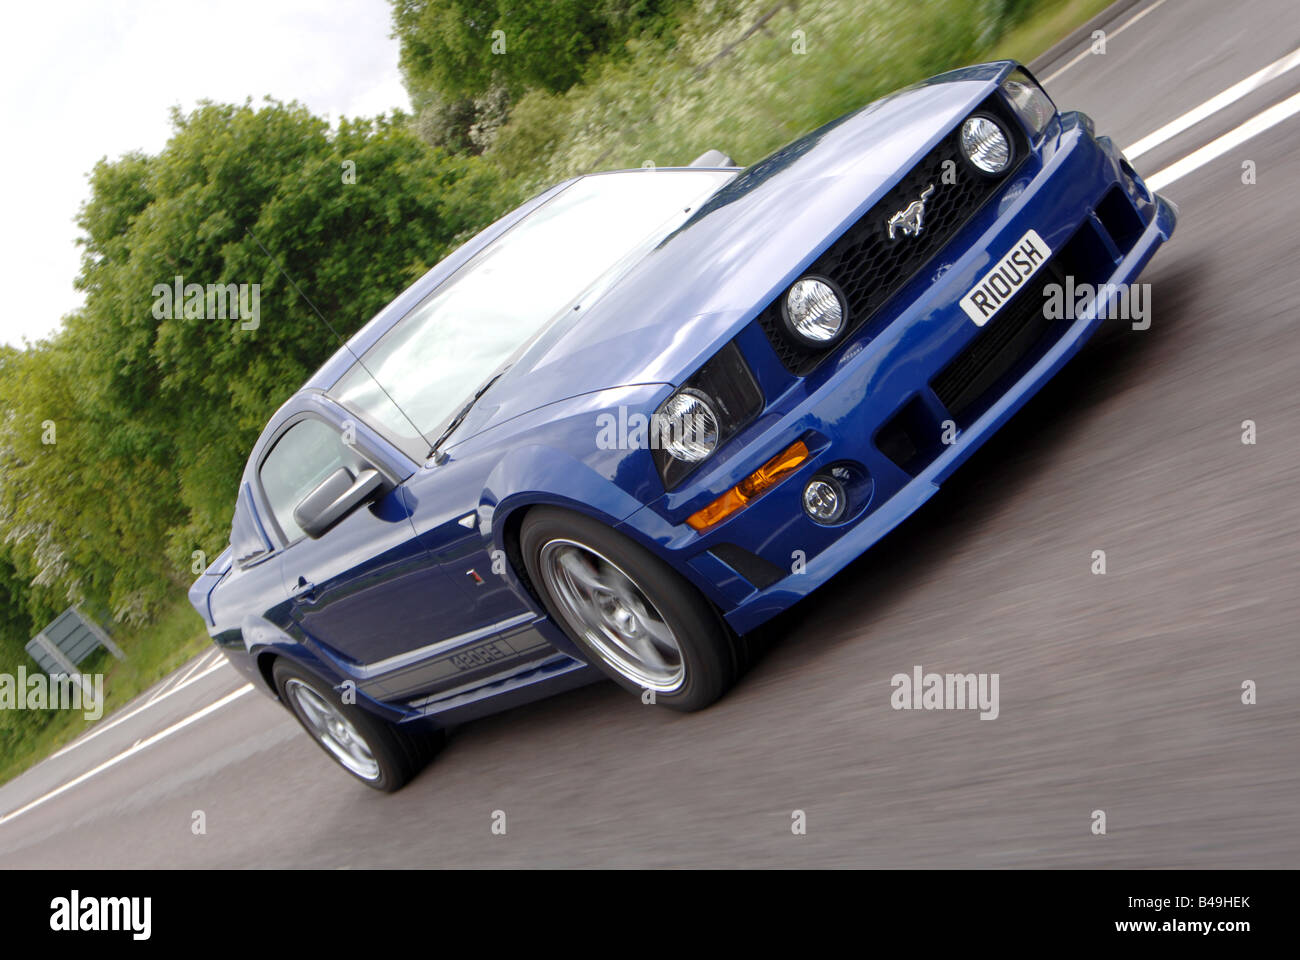 Roush Ford Mustang driving tracking car to car action Stock Photo